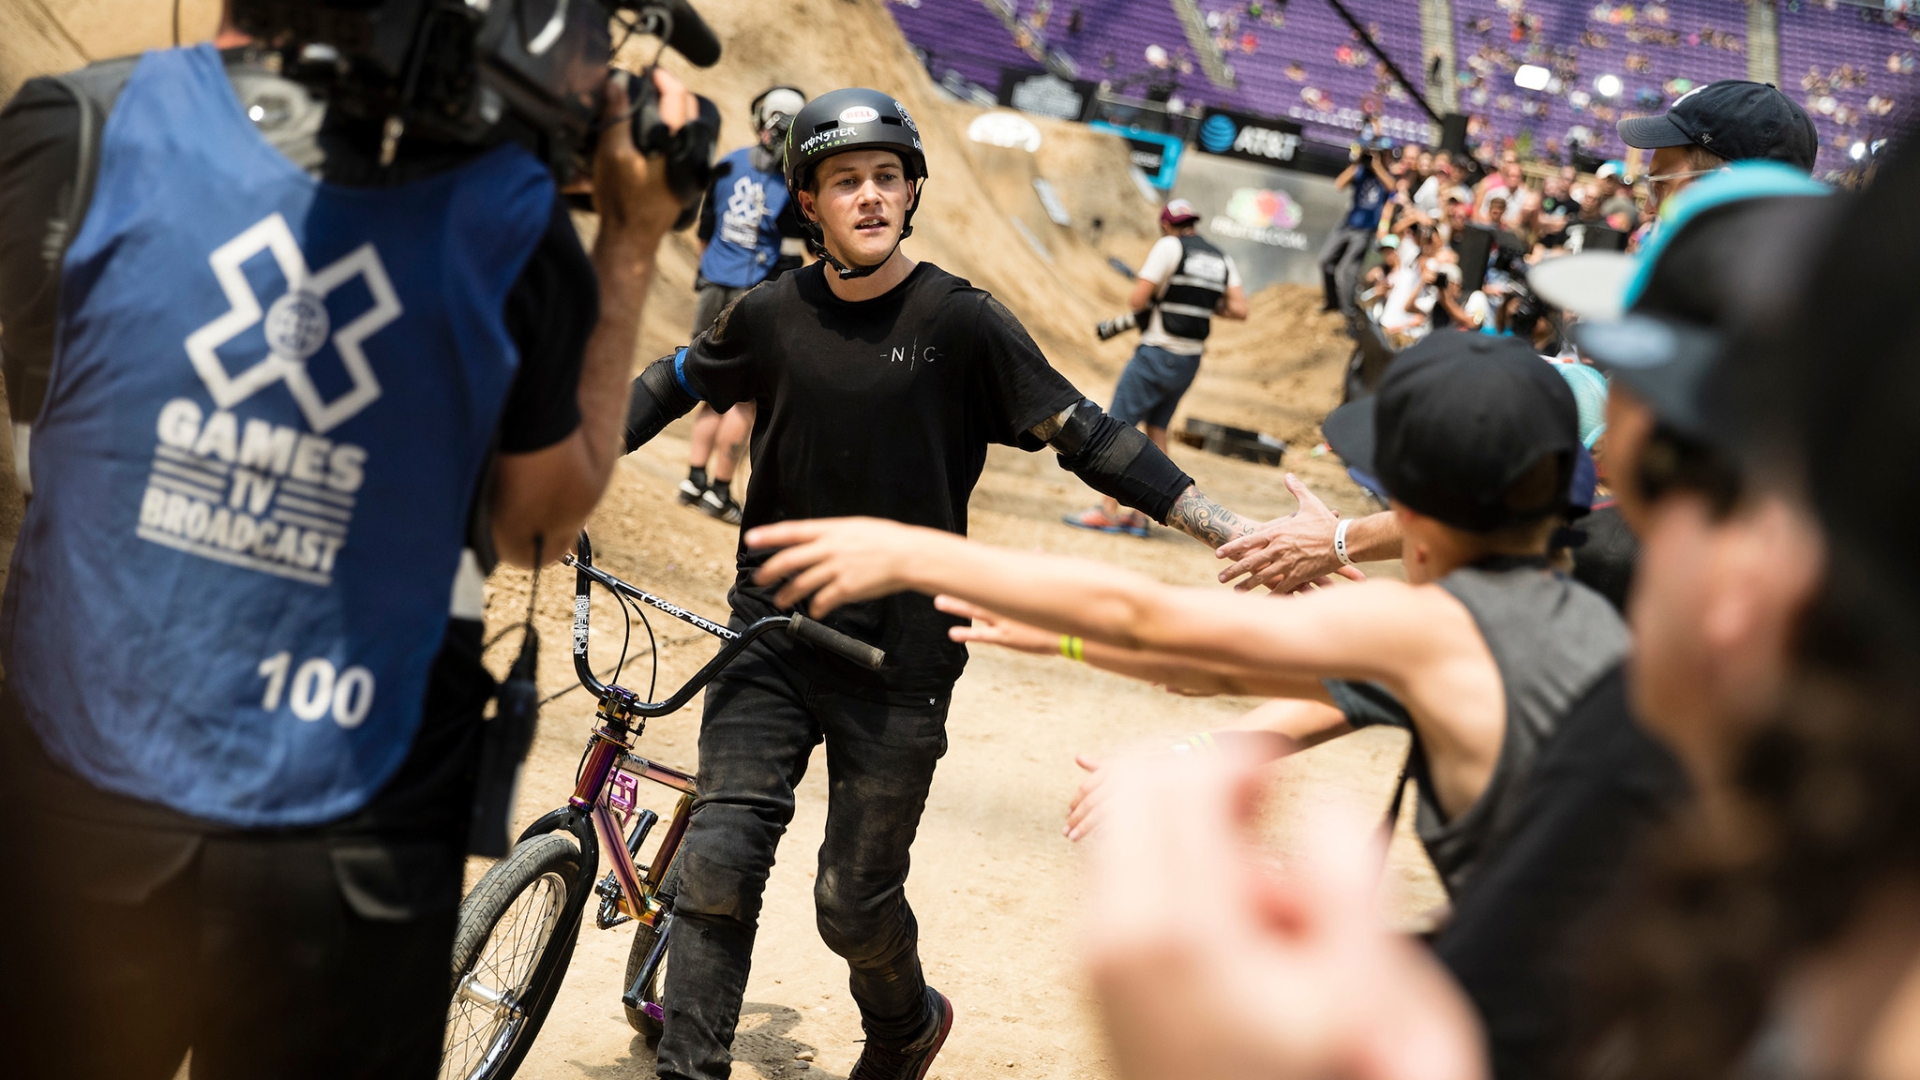 Road to X Games: James Foster